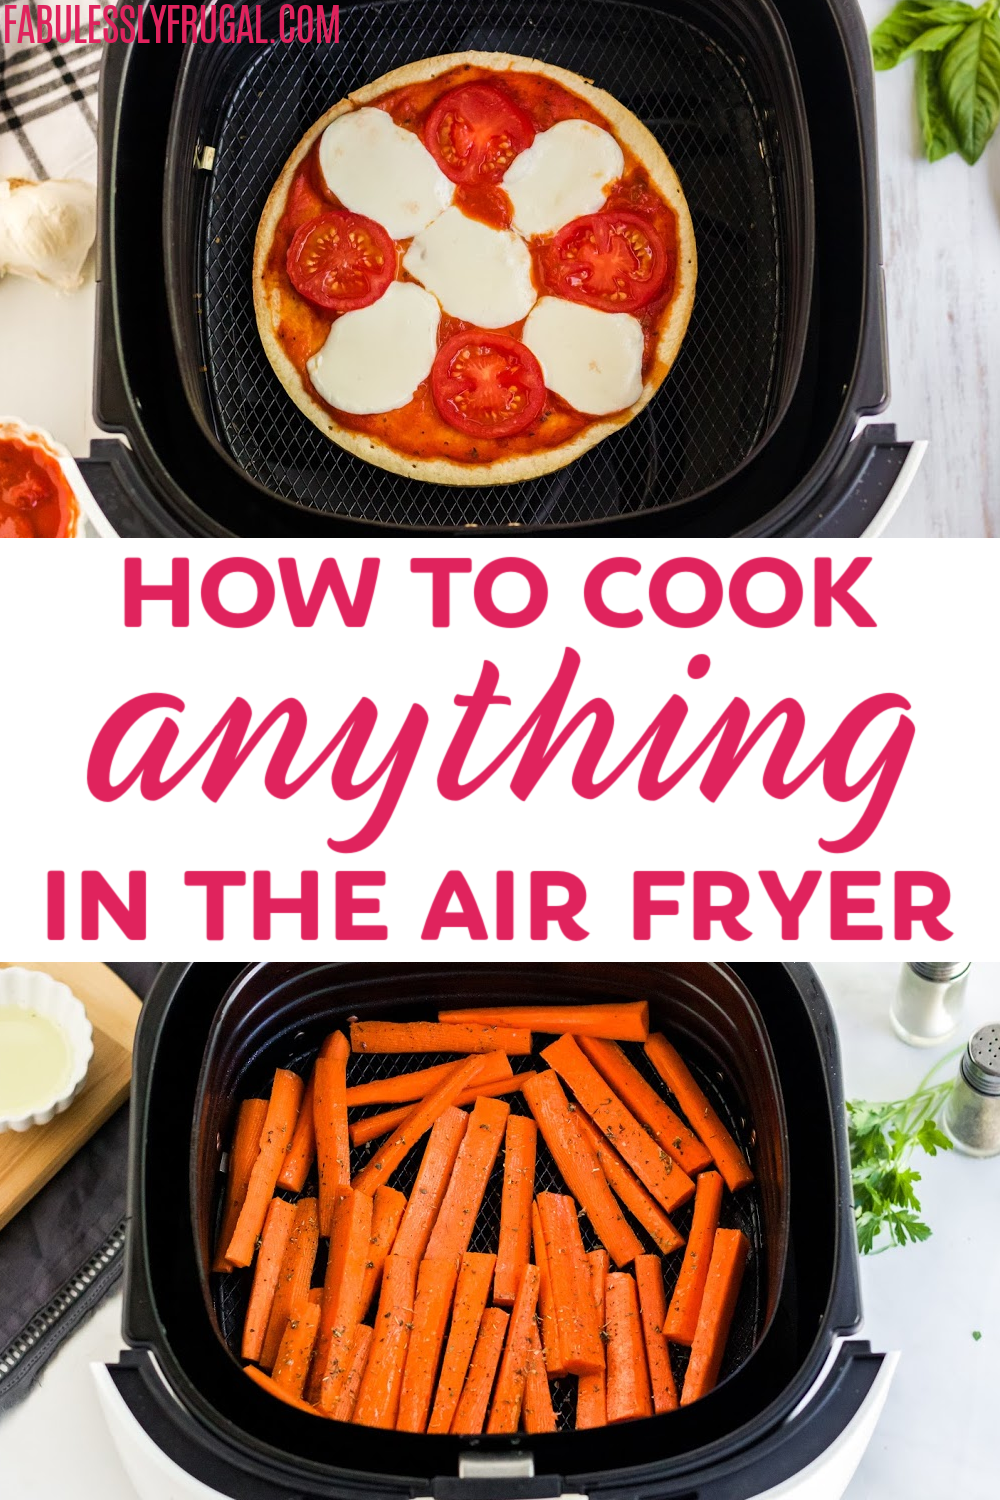 If you can bake it or grill it, you can cook it in the air fryer too! Learn how to cook anything in your air fryer!